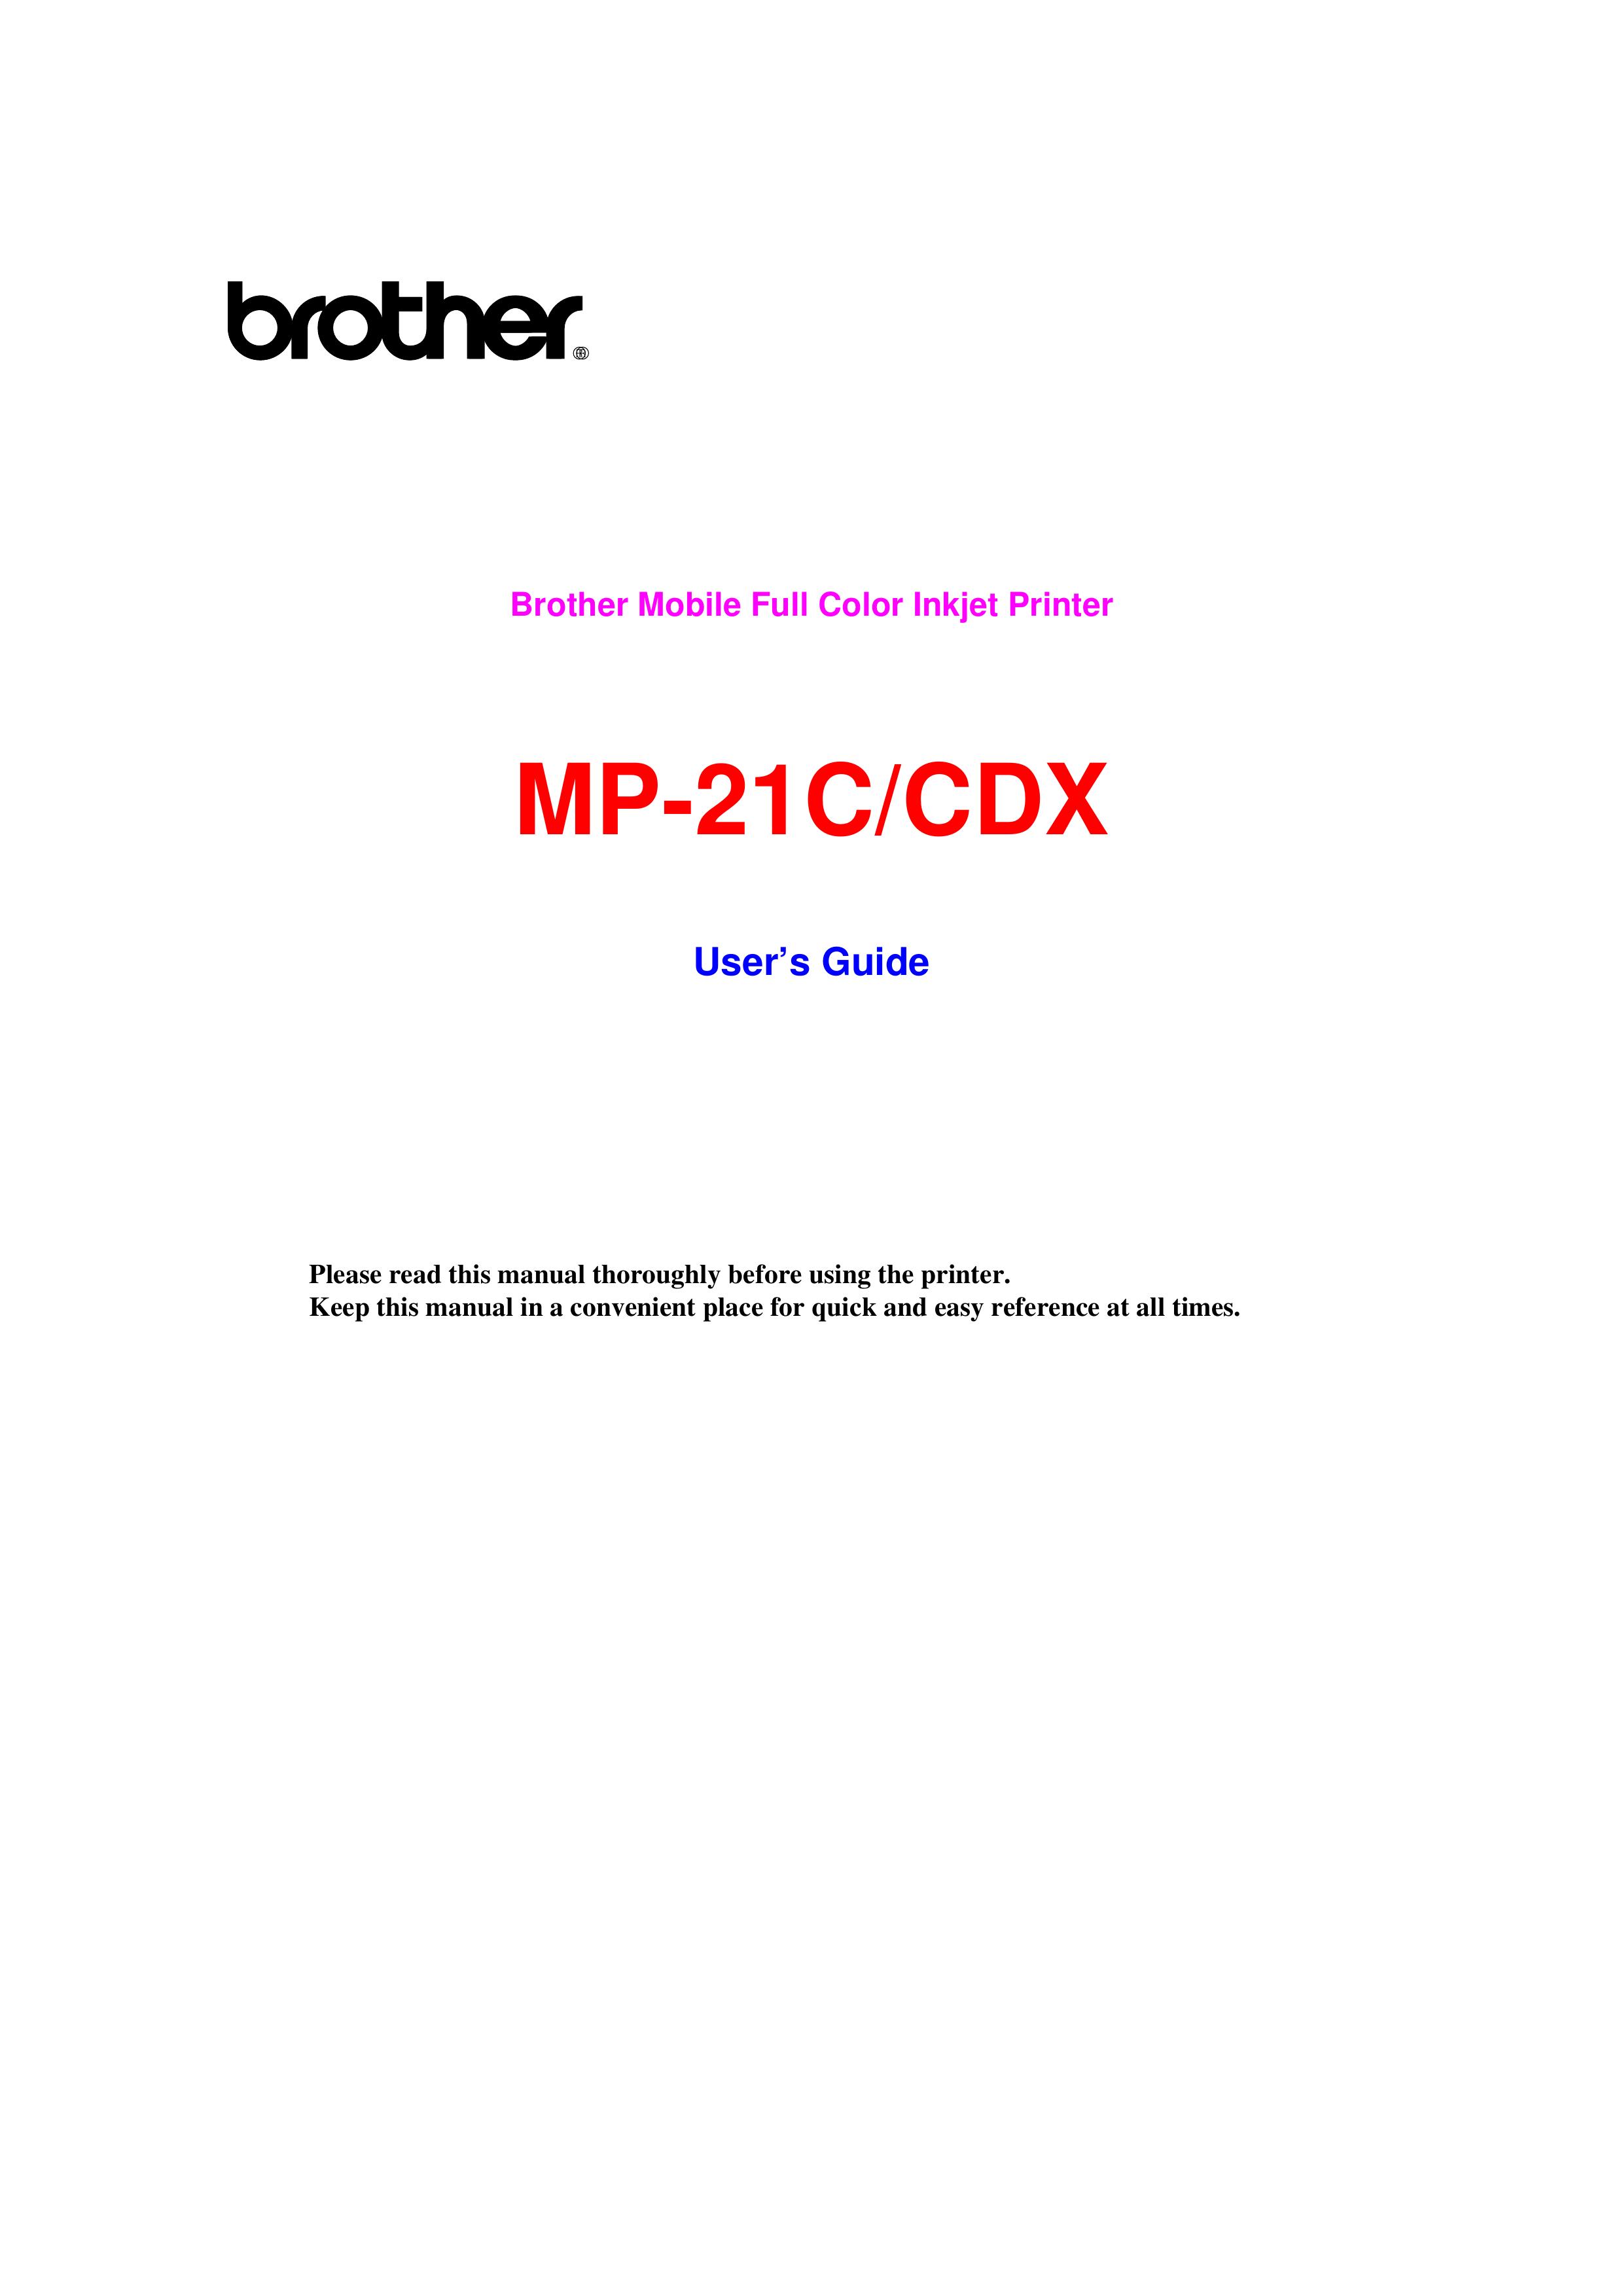 Brother mp-21c/cdx Gas Grill User Manual